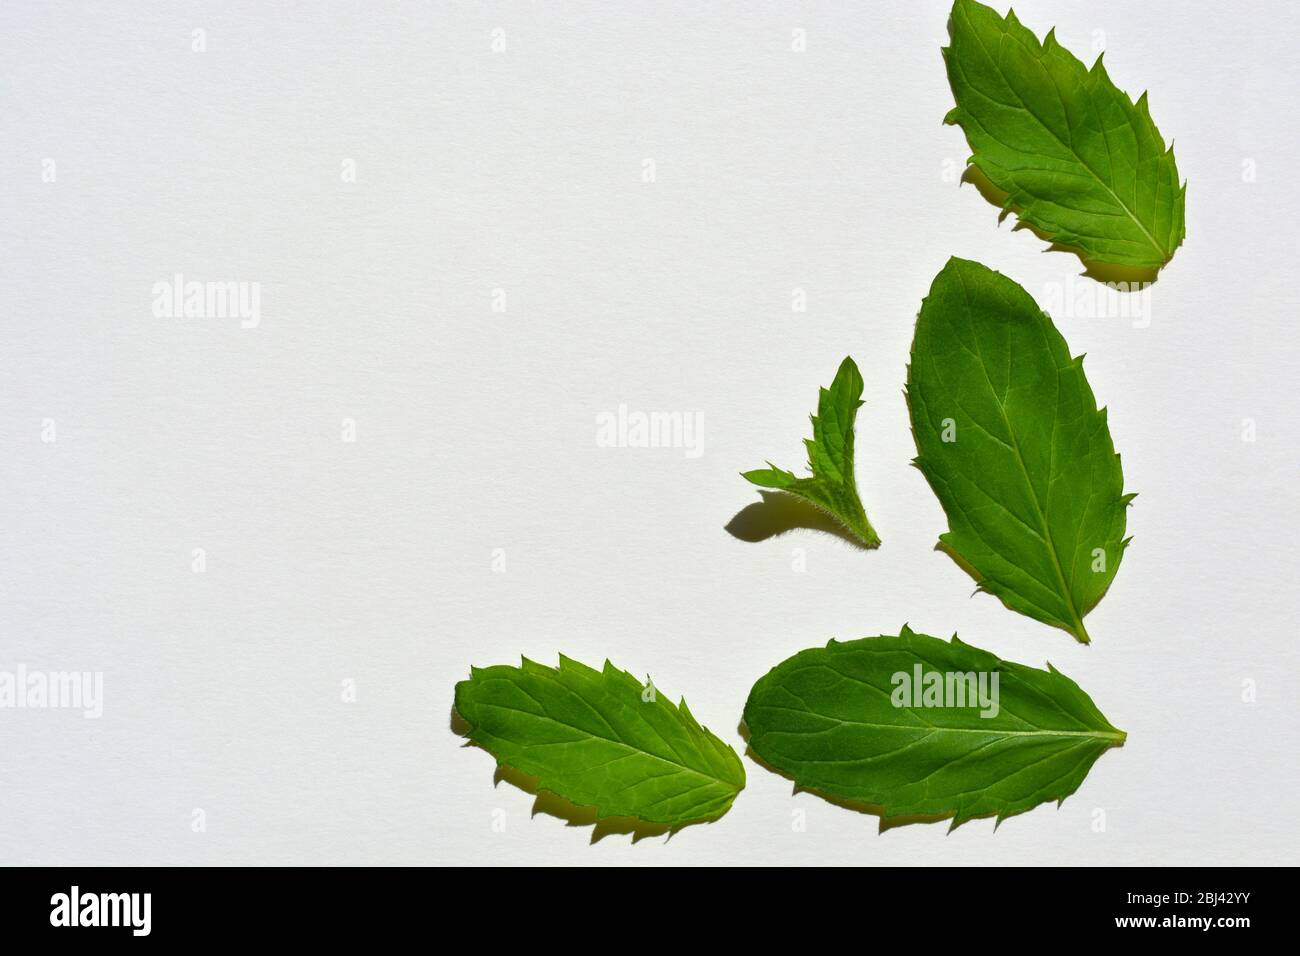 Spearmint, also known as mentha spicata isolated on white background Stock Photo